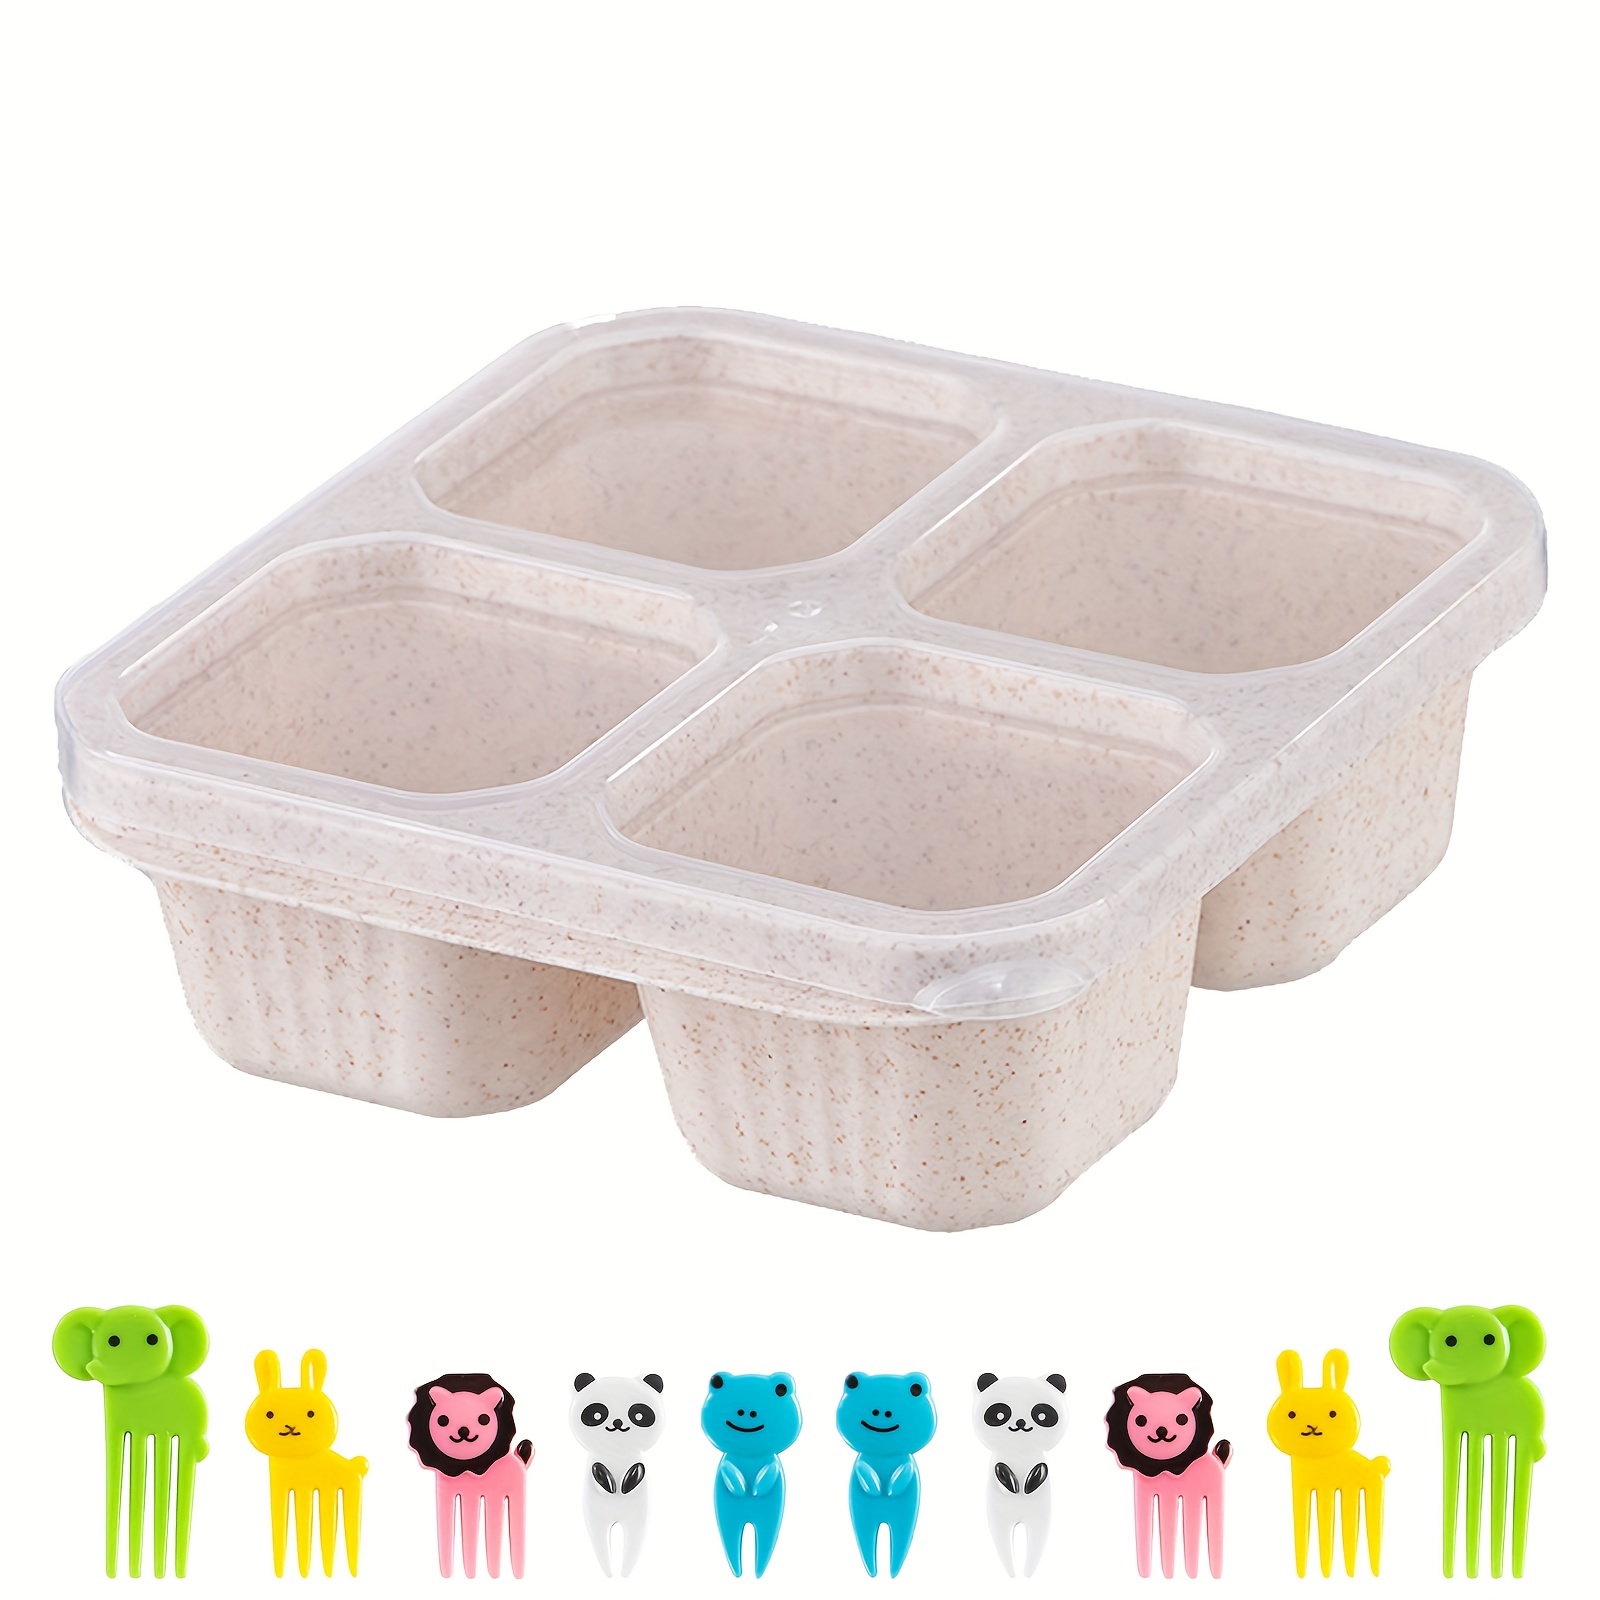 4 Grid Snack Containers Divided Bento Snack Box 4 Compartments Reusable